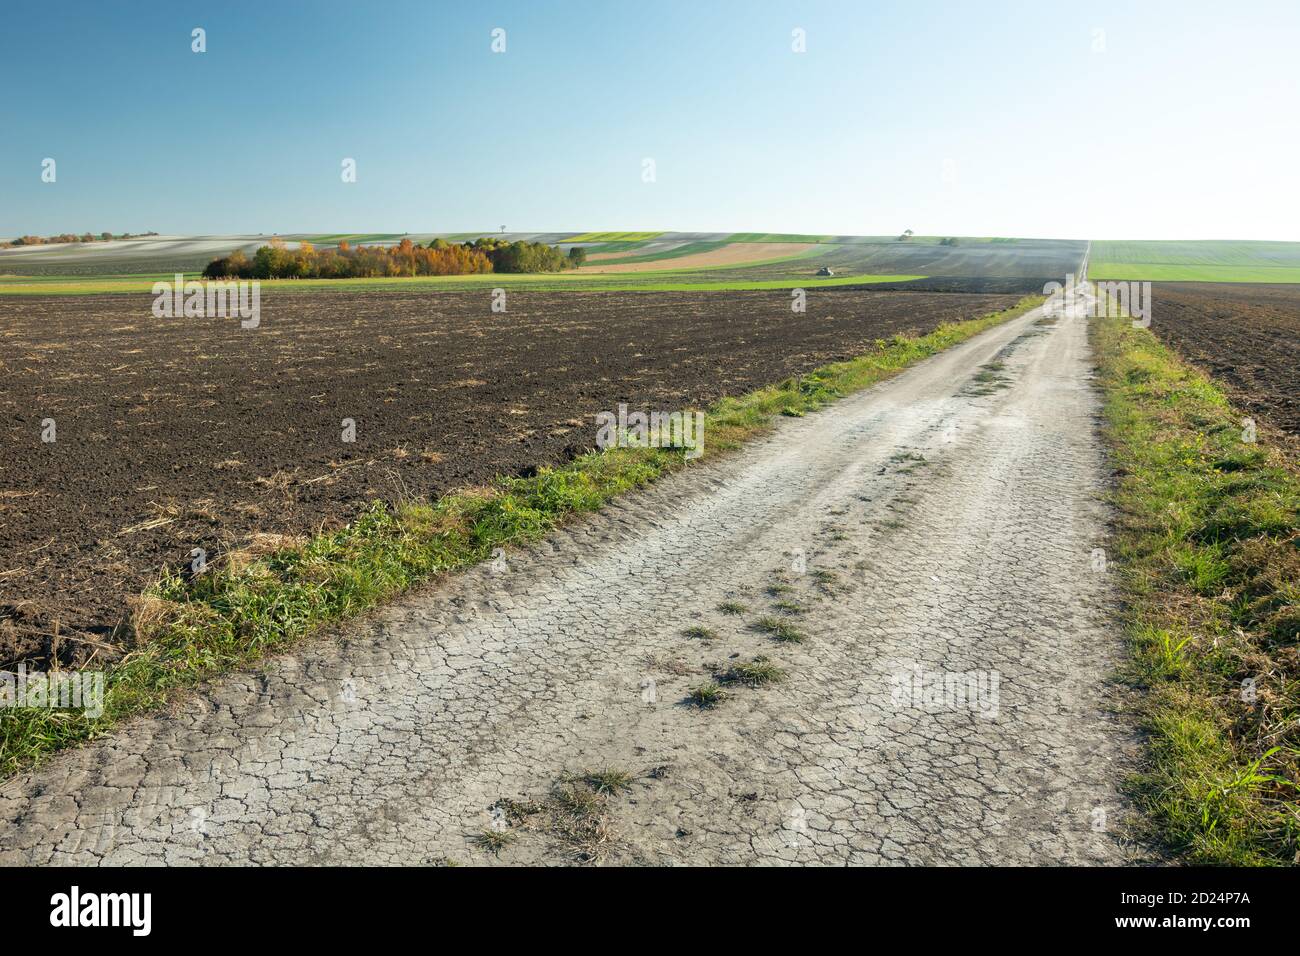 Long dirt road through fields, group of trees Stock Photo